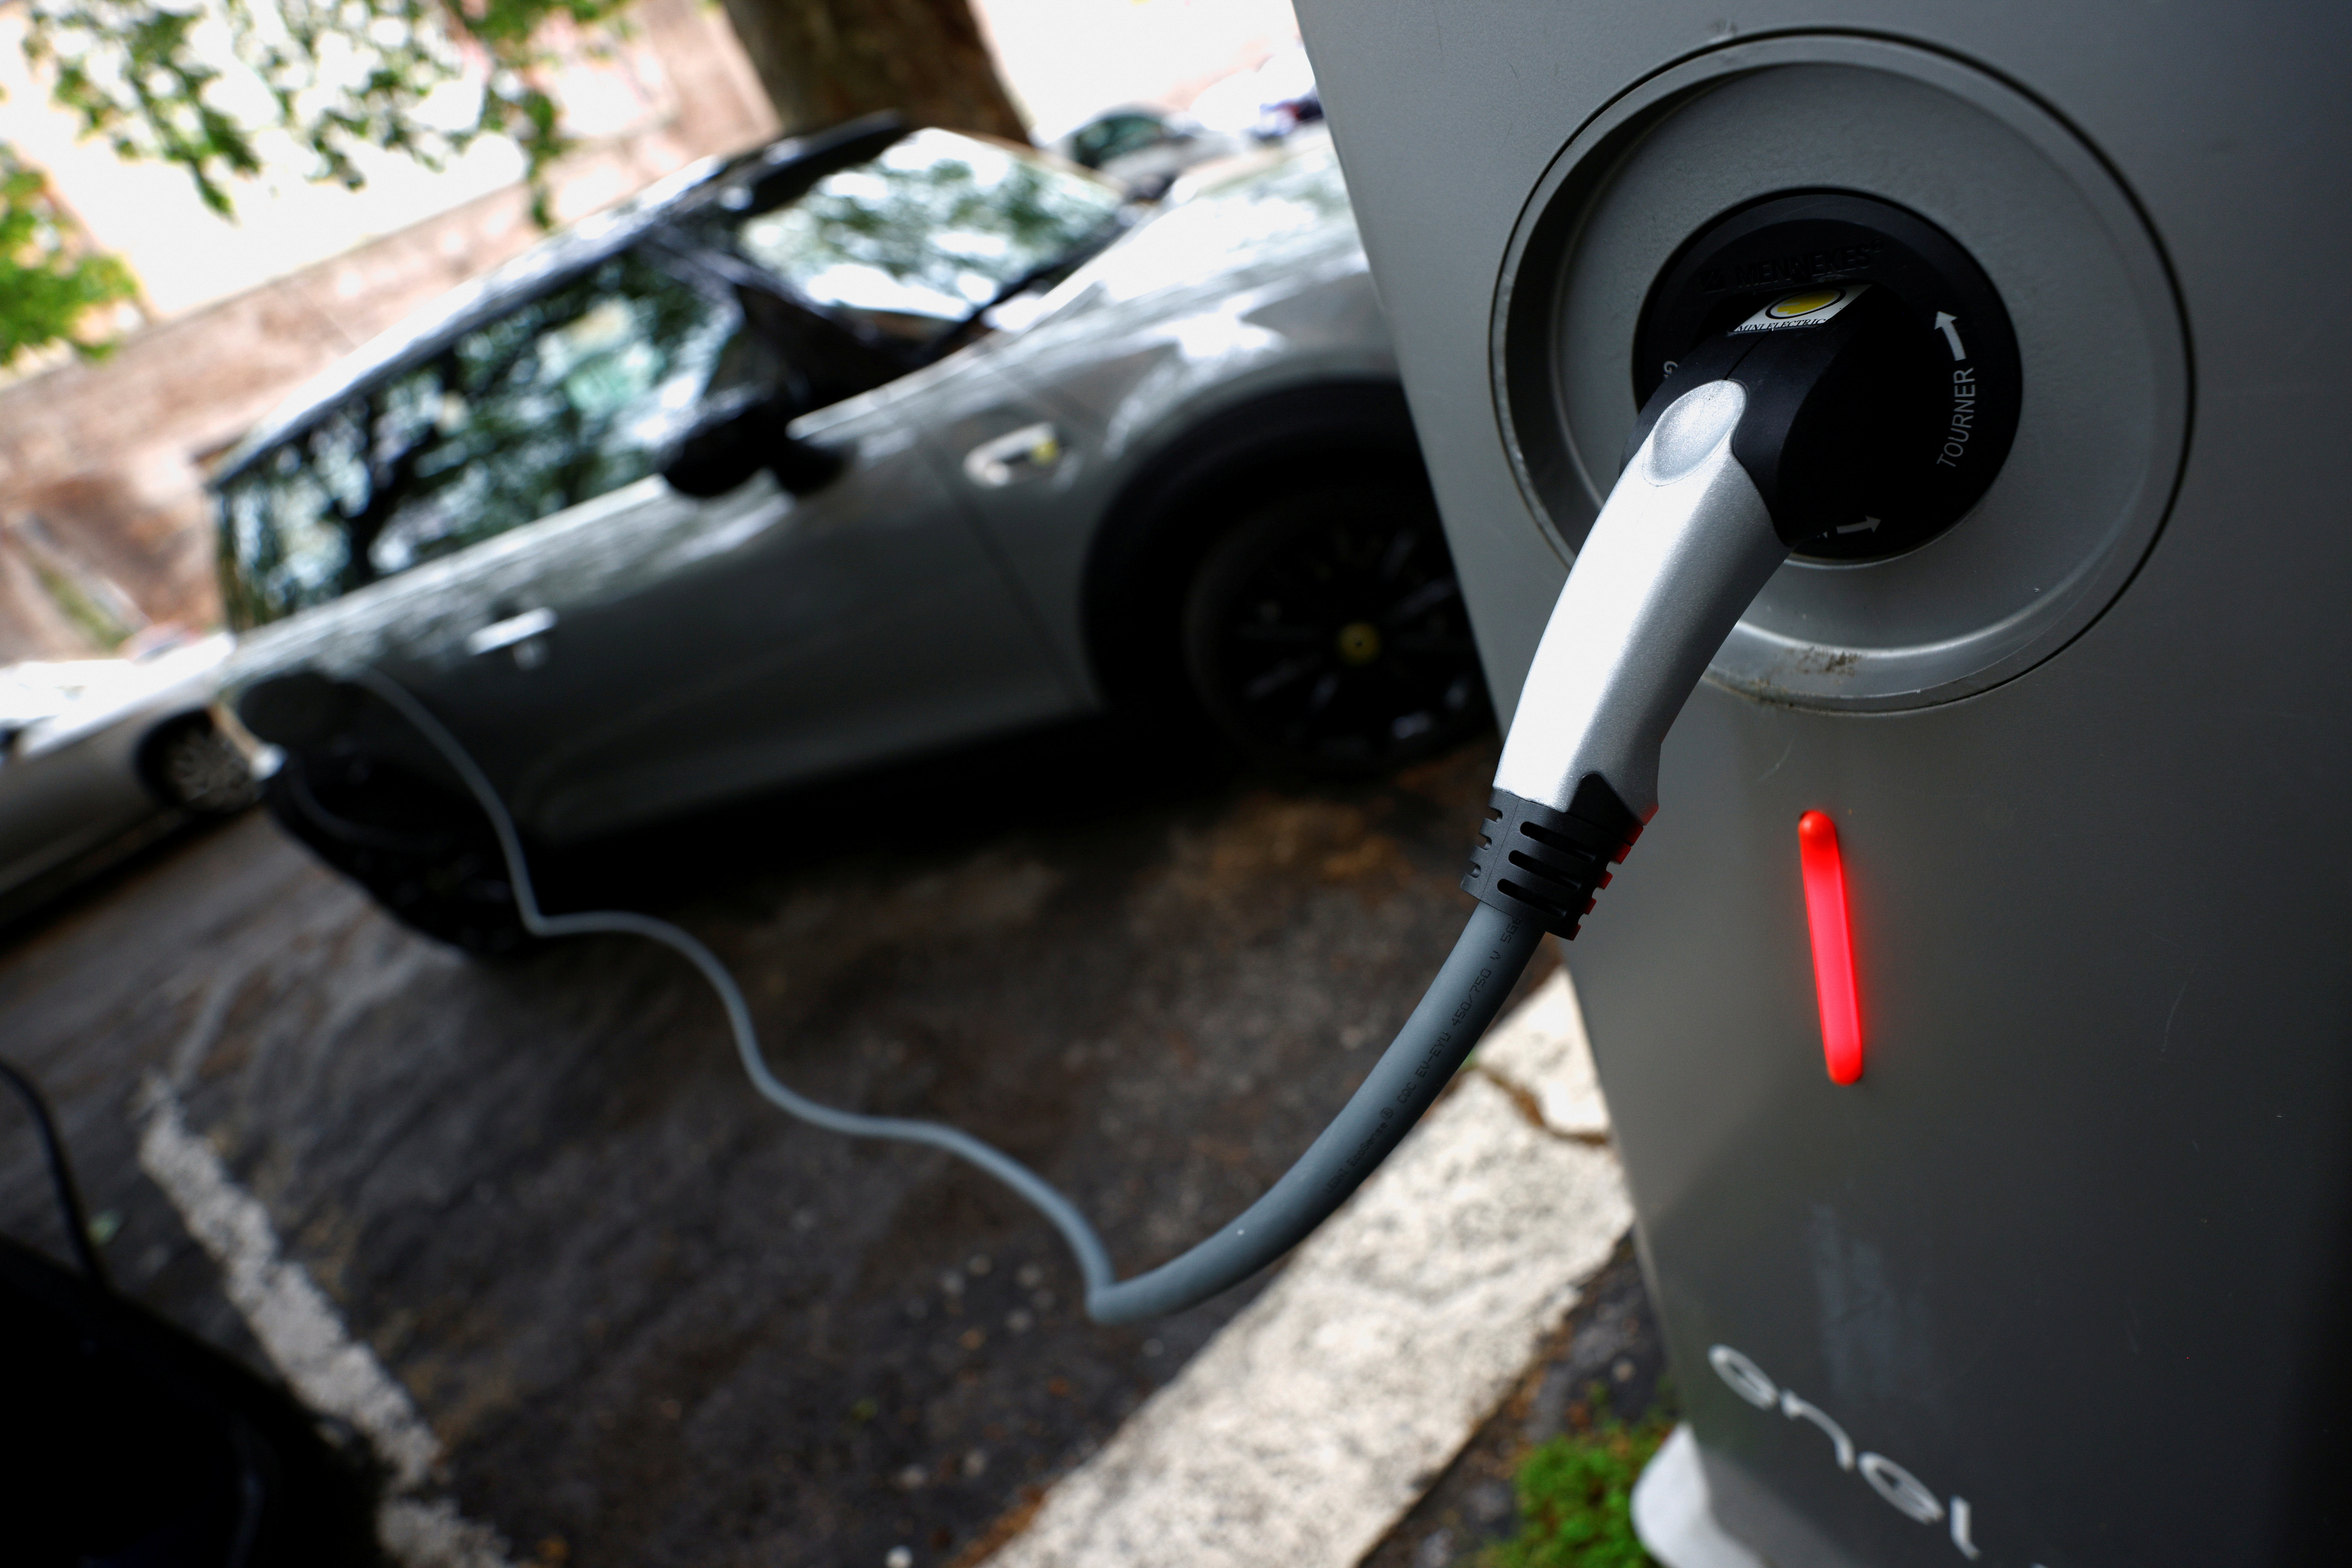 An electric car is seen plugged in at a charging point for electric vehicles in Rome, Italy, April 28, 2021. REUTERS/Guglielmo Mangiapane